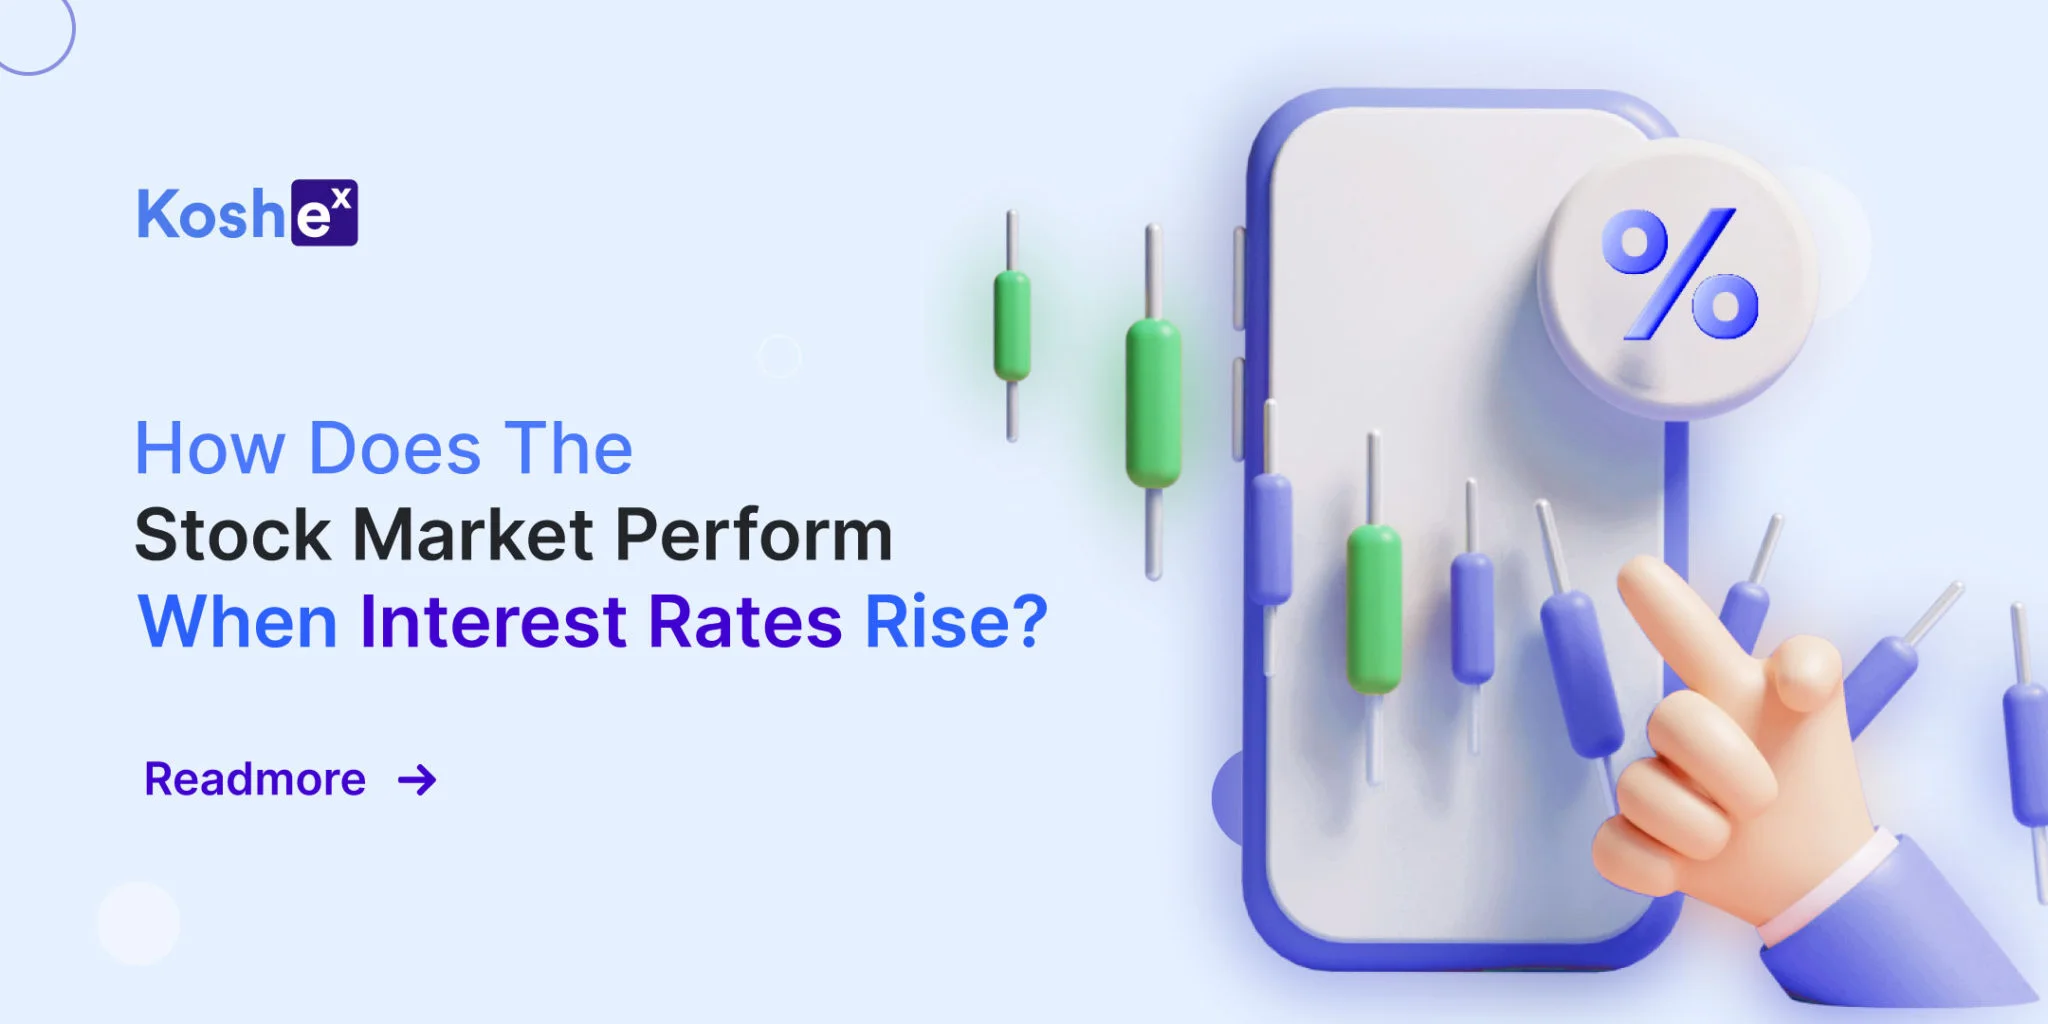 How Does The Stock Market Perform When Interest Rates Rise?